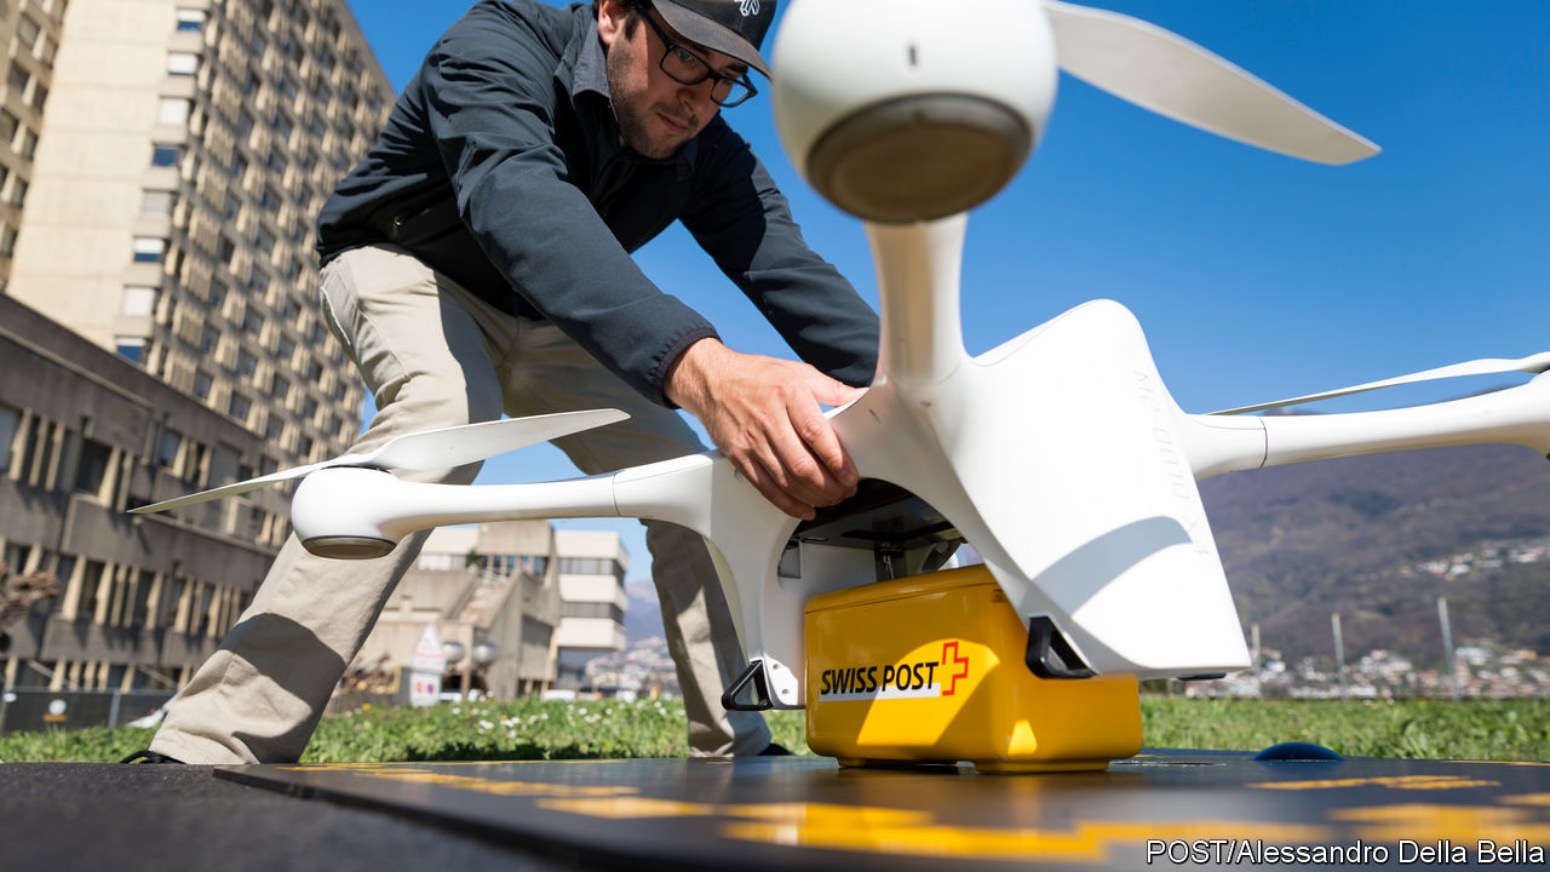 Deliveries by drone are taking off in health care